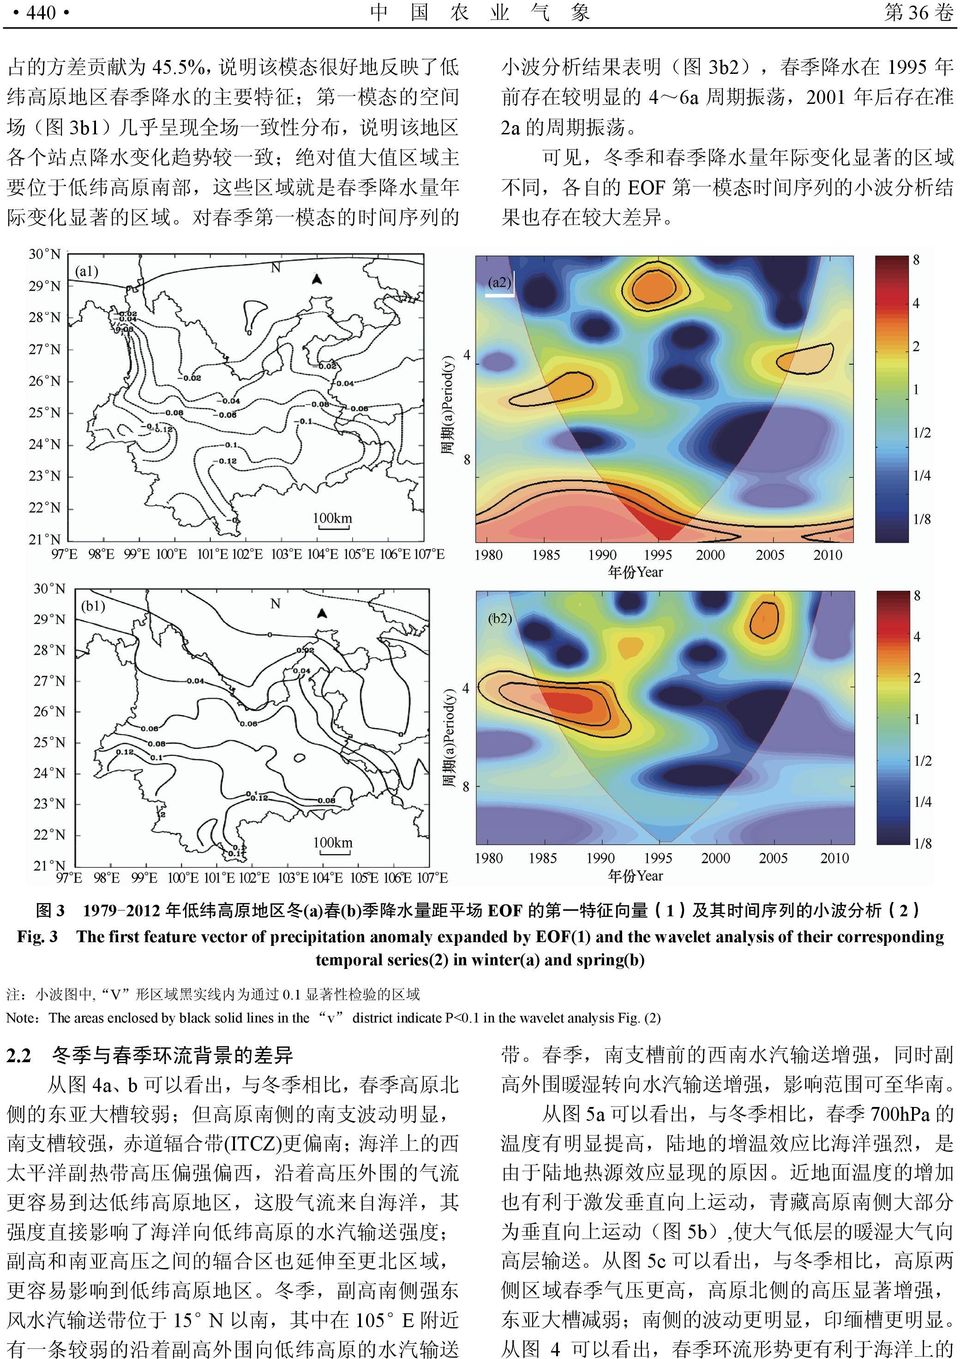 first feature vector of precipitation anomaly expanded by EOF(1) and the wavelet analysis of their corresponding temporal series(2) in winter(a) and spring(b) 注 小波图中, V 形区域黑实线内为通过 0.